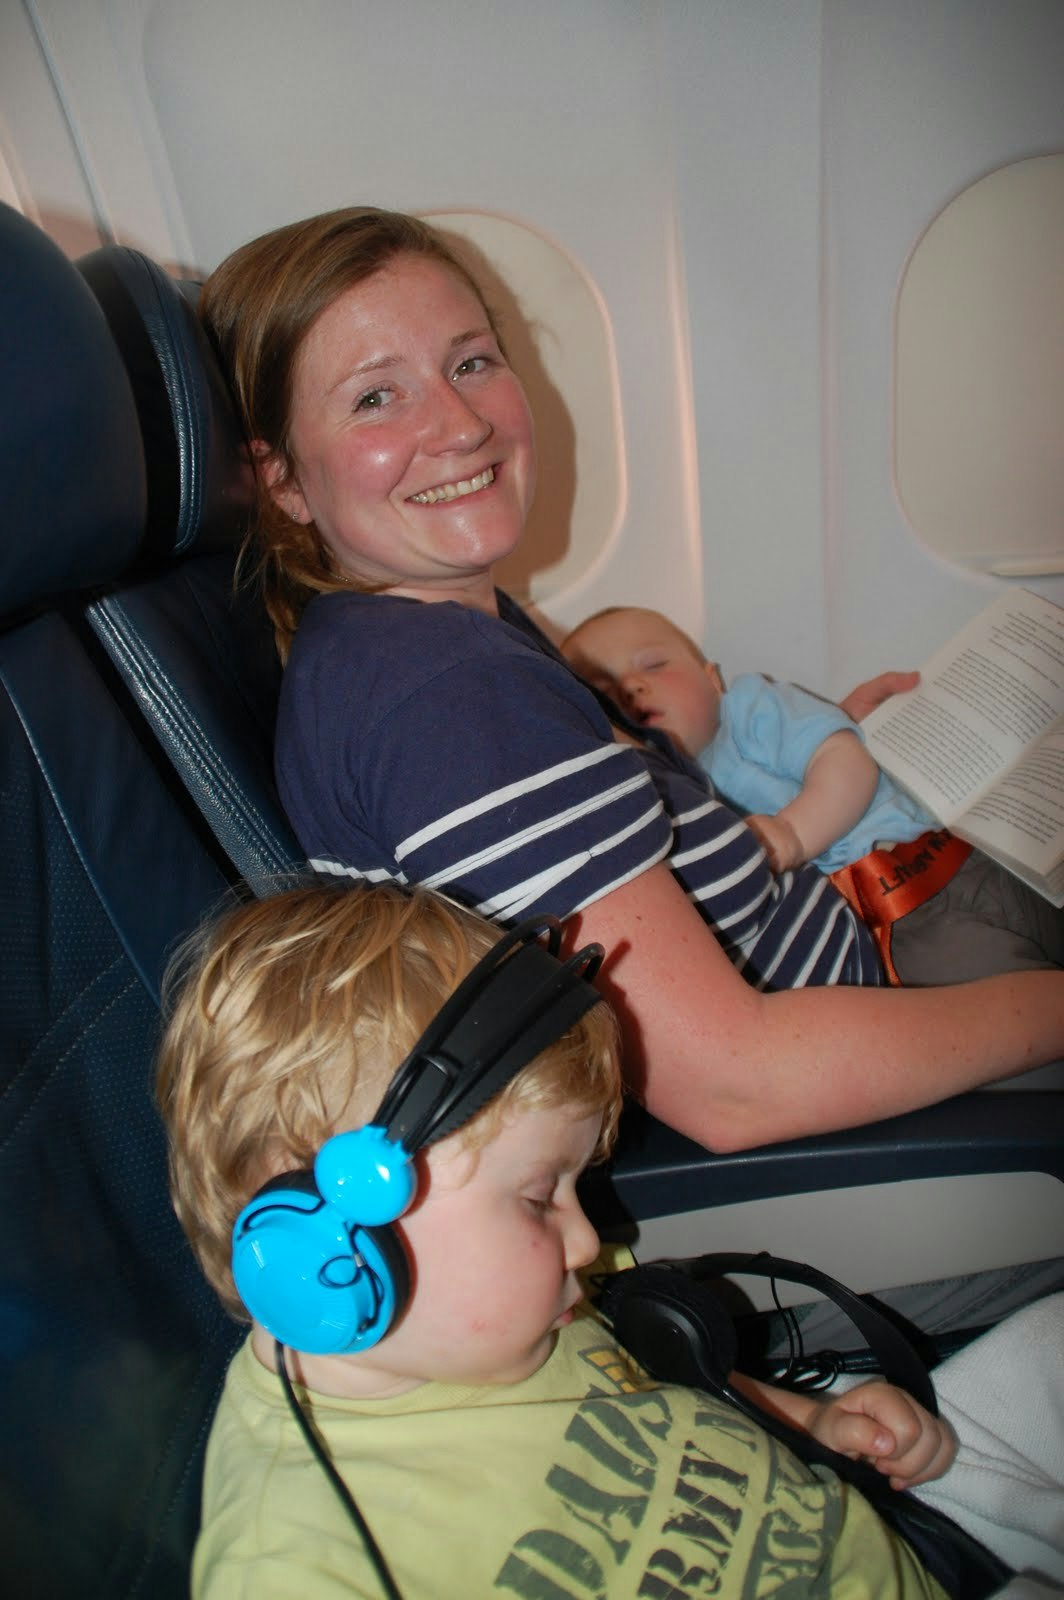 Imogen cradles a baby in her arms while another child rests on the seat listening to headphones